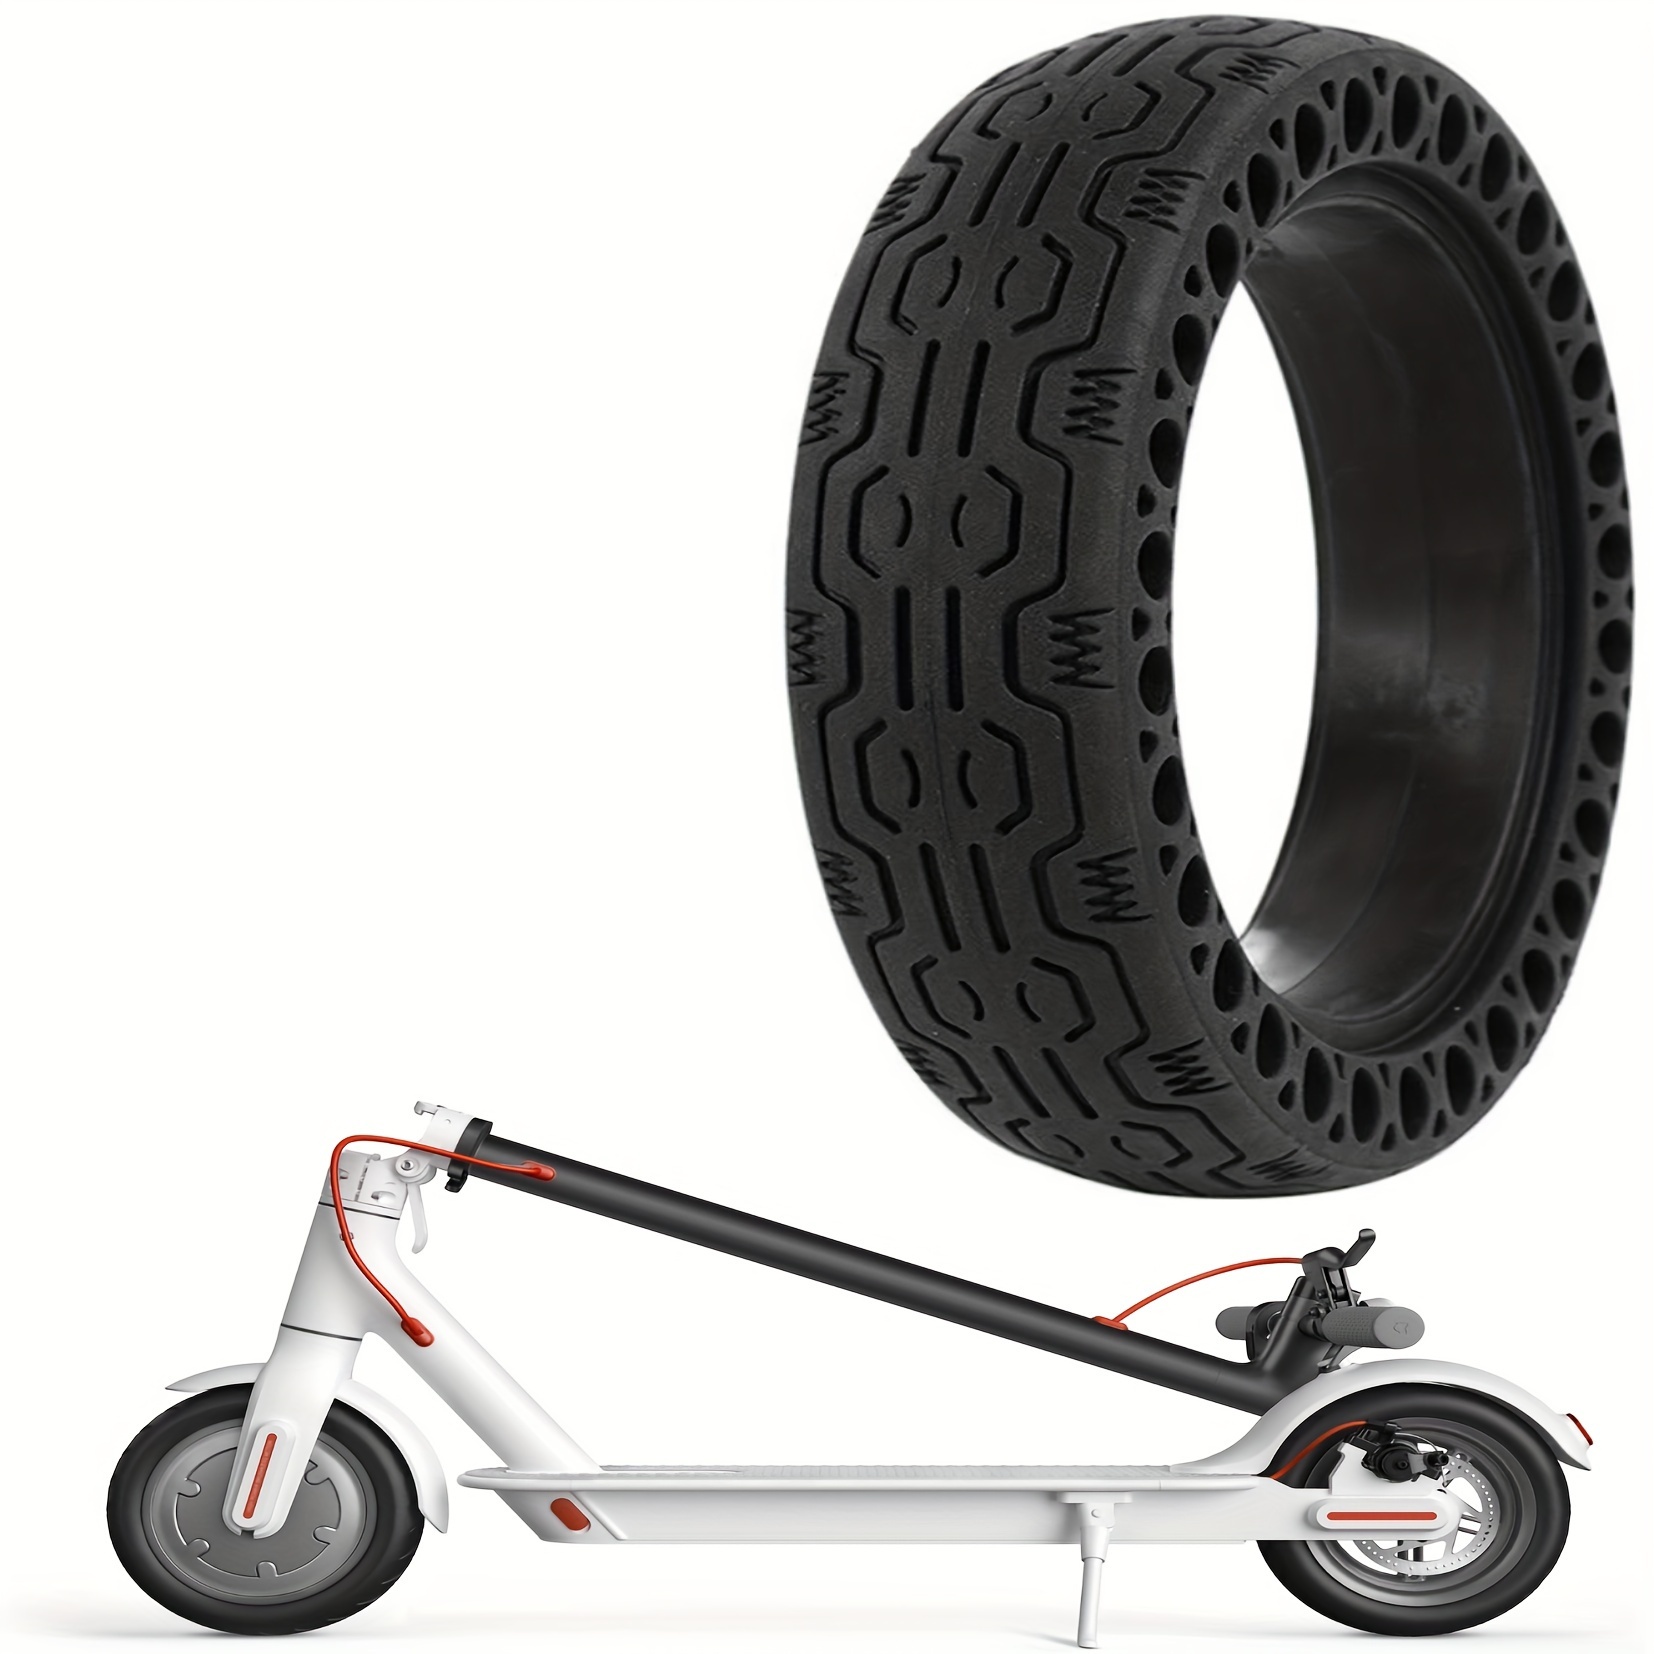 8.5X2.0 Damping Solid Tire for Xiaomi M365 Pro Pro 2 1S Electric Scooter  8.5 inch Explosion-Proof Tyre Non-Pneumatic Wheel Tires